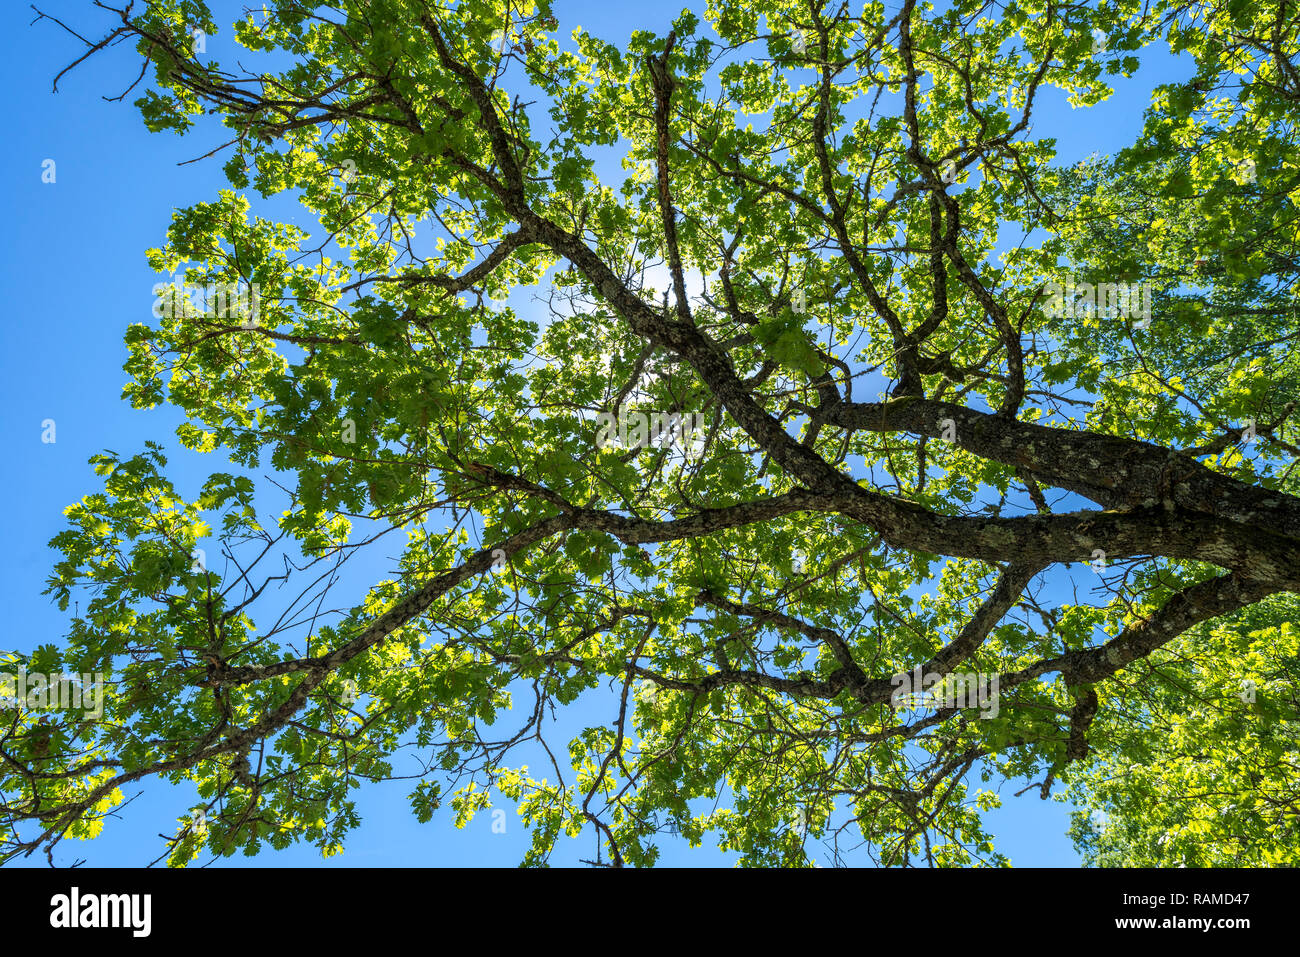 Leaves and branches of Pyrenean oak, Quercus pyrenaica. It is a tree native to southwestern Europe and northwestern Africa. Stock Photo